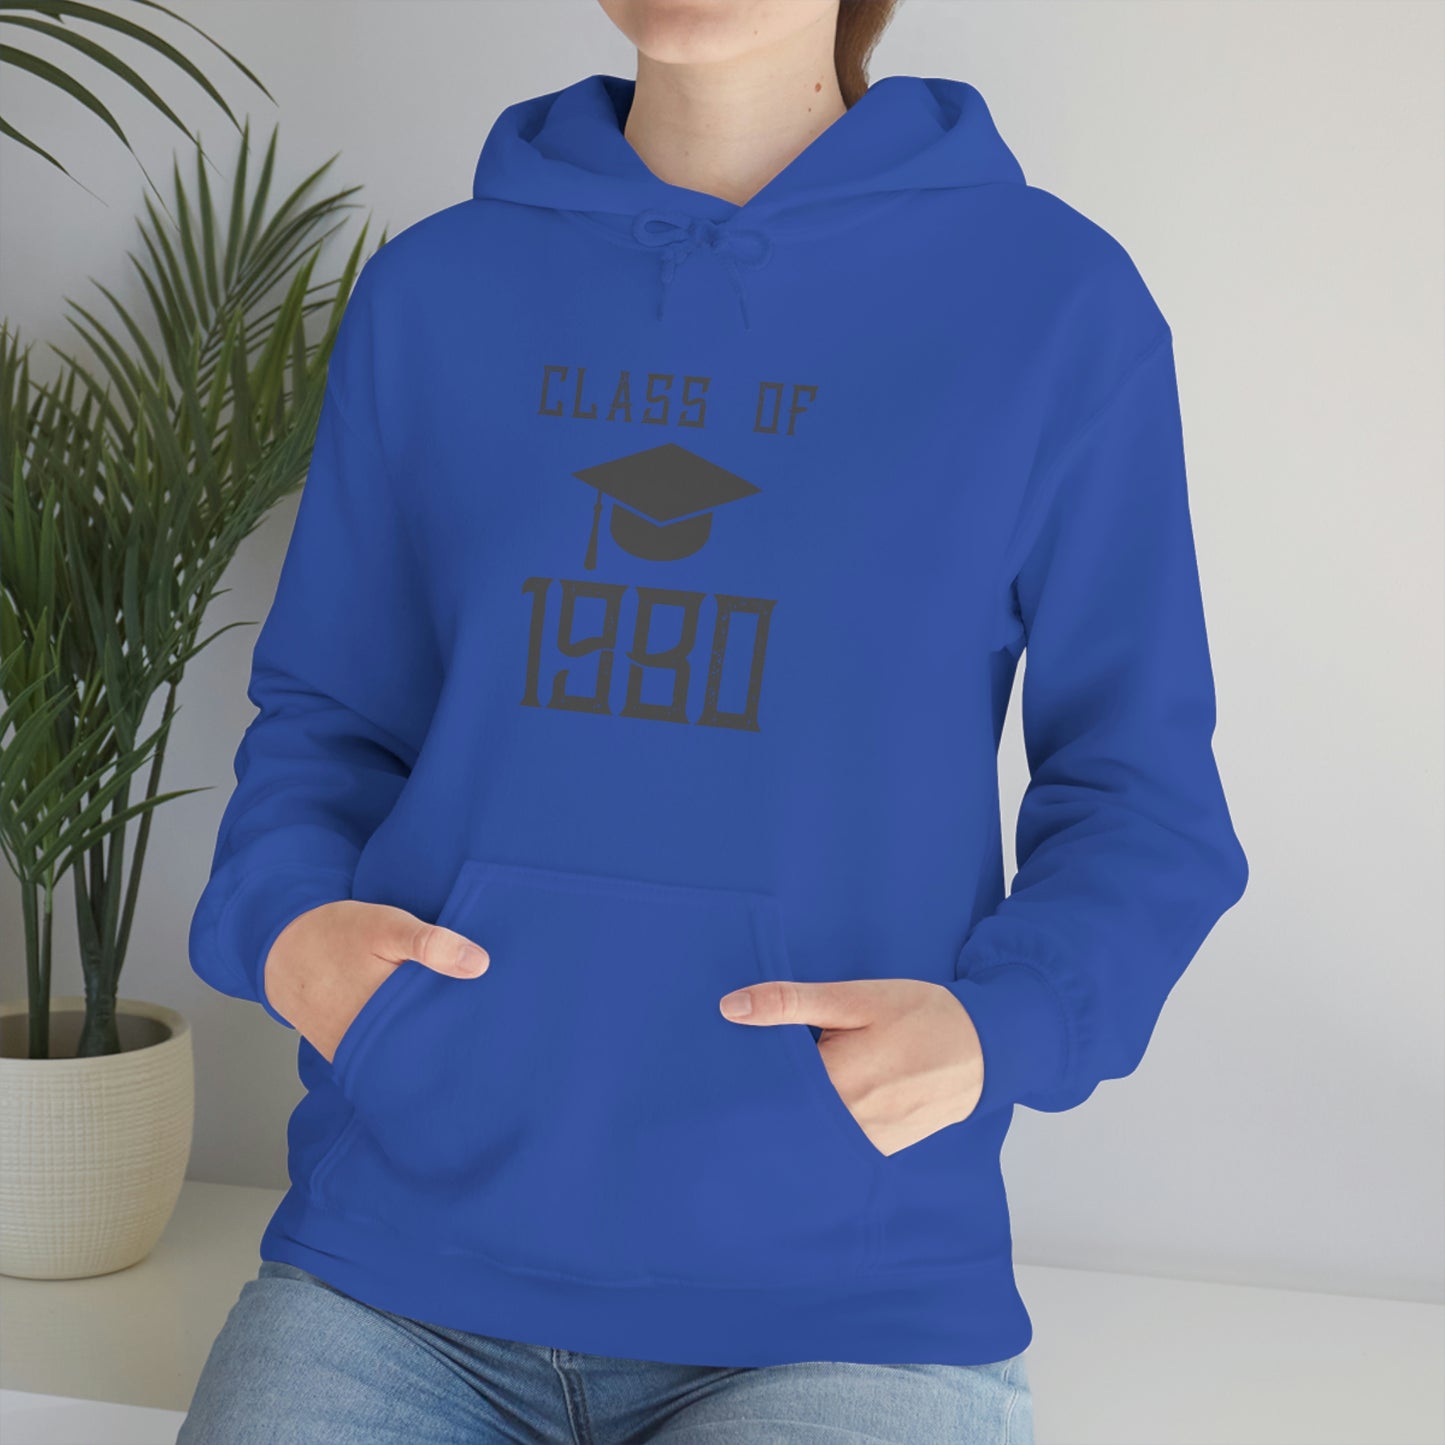 "Class Of 1980" Hoodie - Weave Got Gifts - Unique Gifts You Won’t Find Anywhere Else!